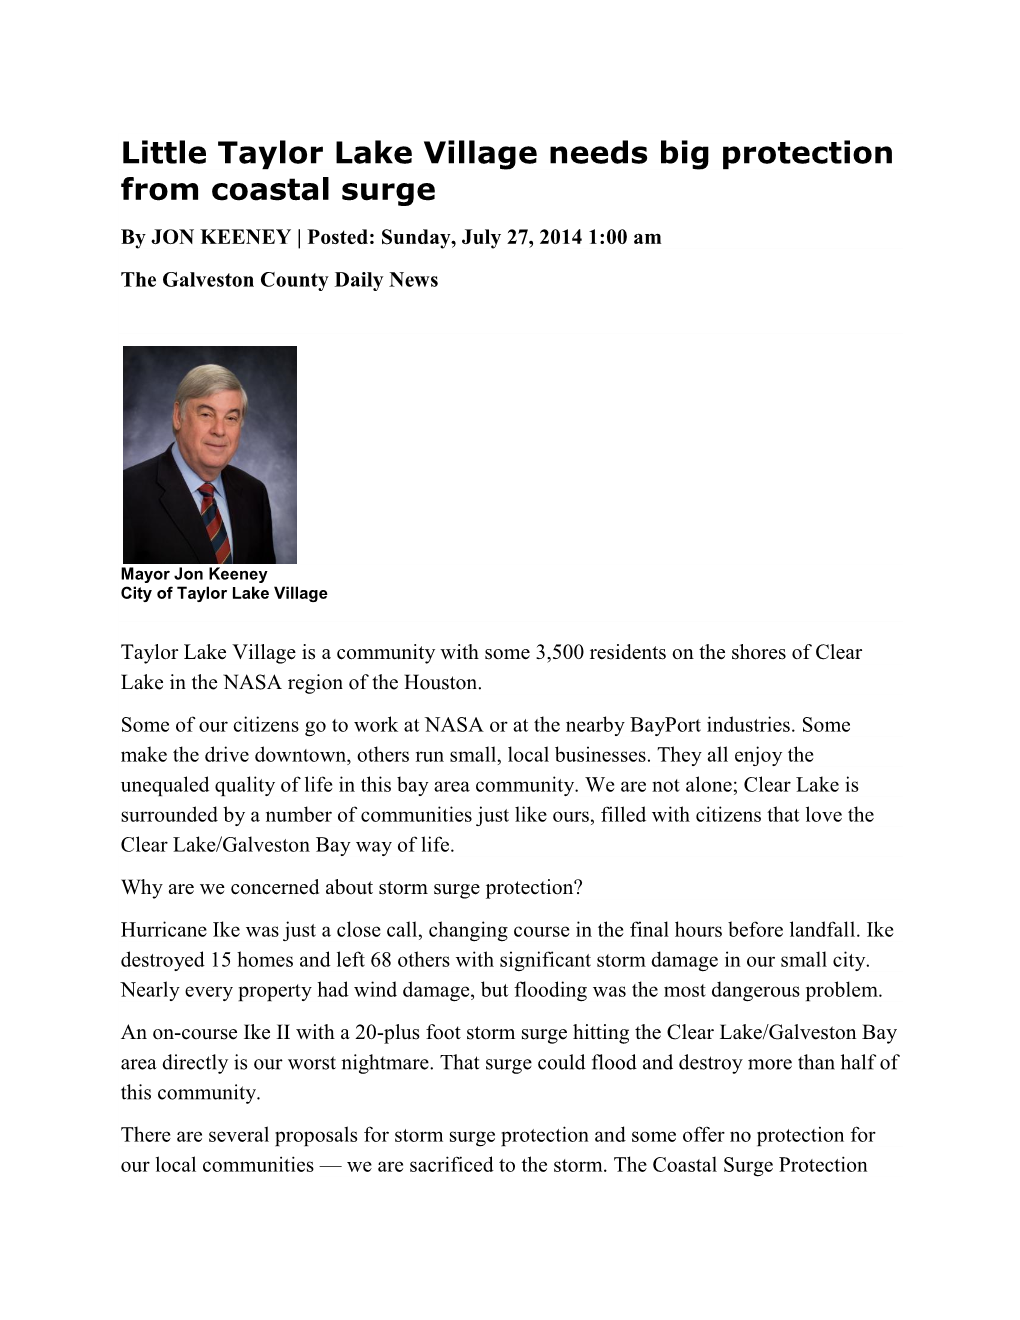 Little Taylor Lake Village Needs Big Protection from Coastal Surge by JON KEENEY | Posted: Sunday, July 27, 2014 1:00 Am the Galveston County Daily News